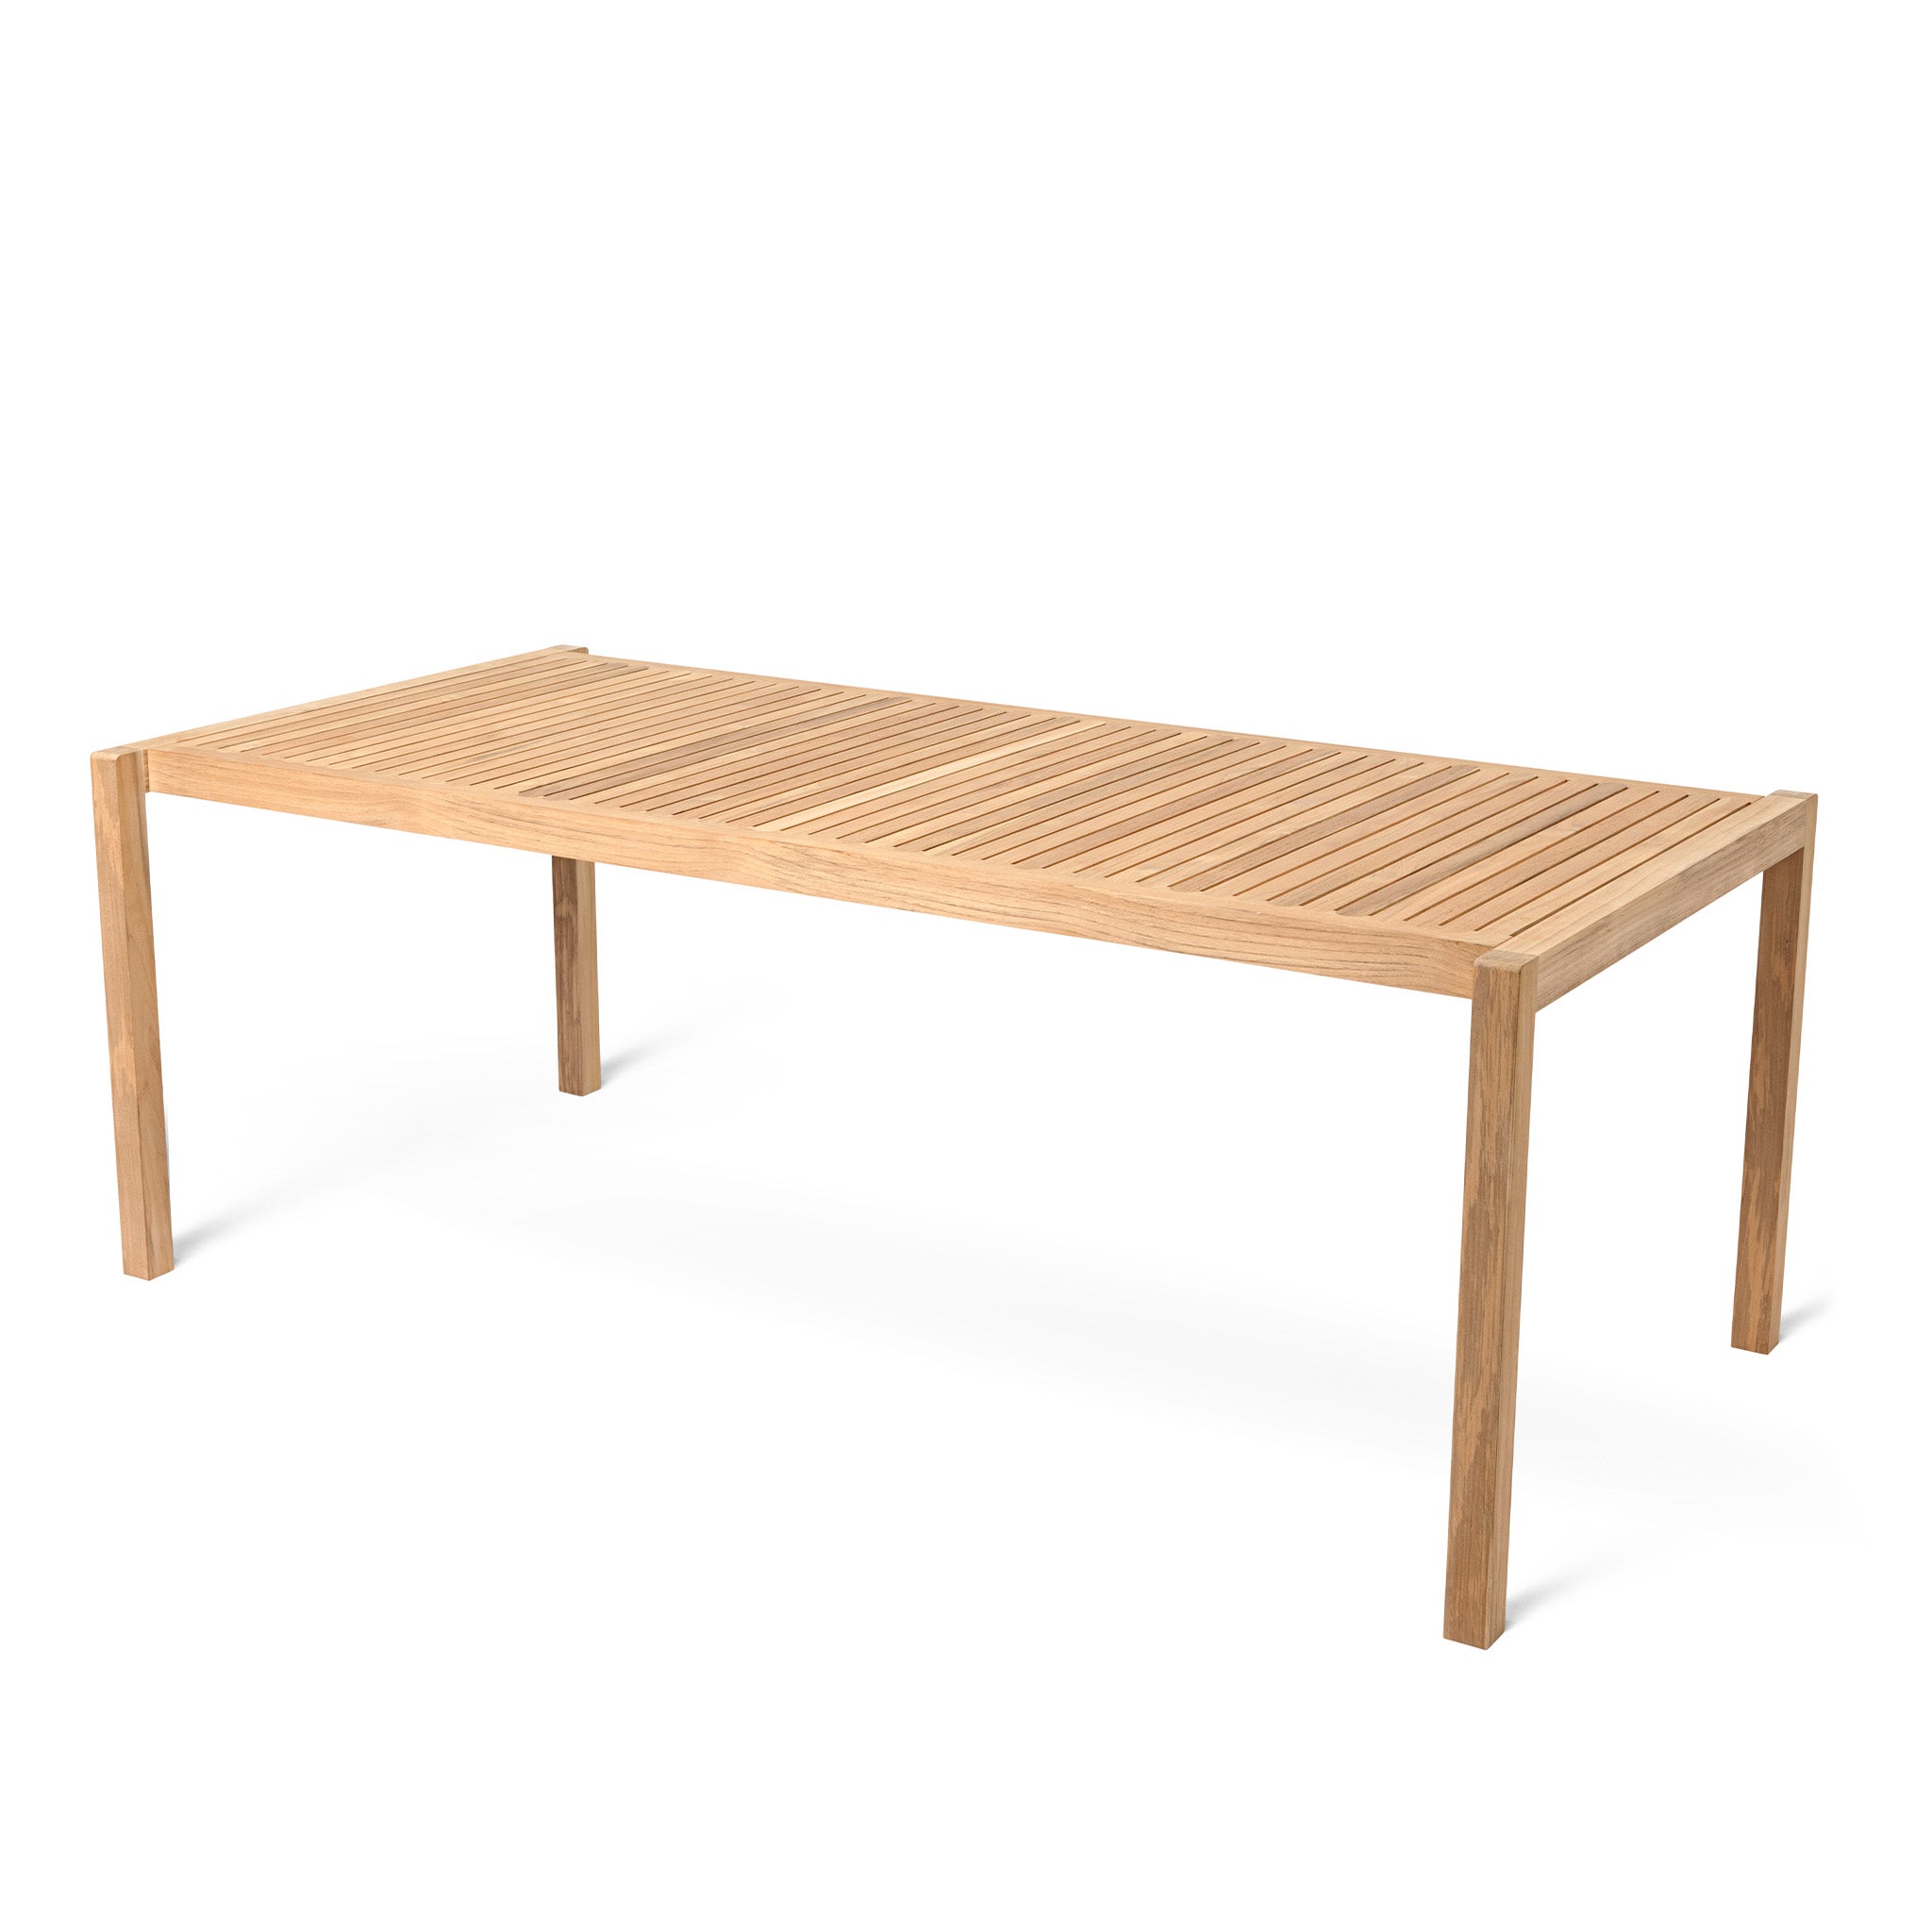 AH901 / AH902 Outdoor Dining Tables by Alfred Homann